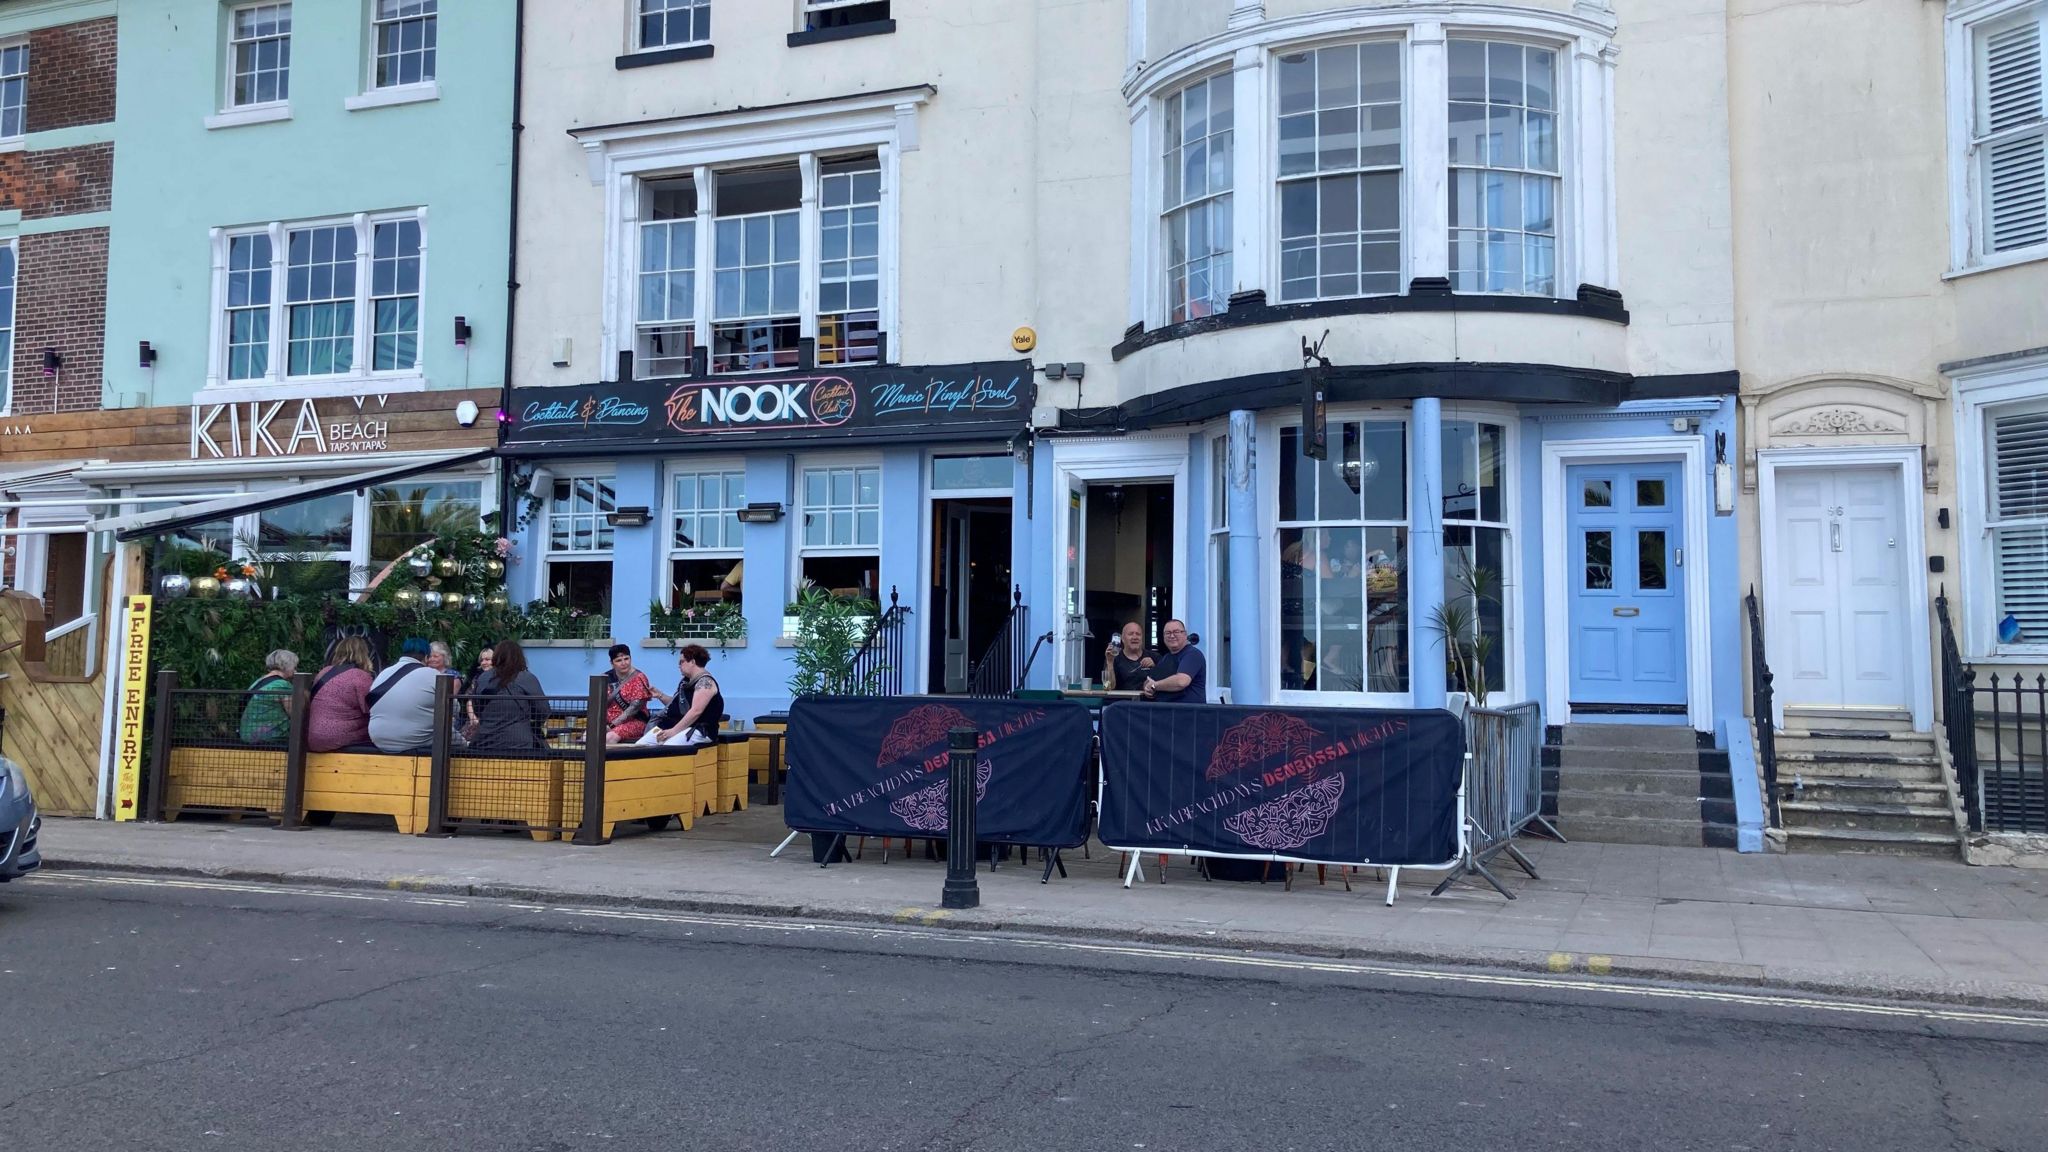 The Nook cocktail bar in Weymouth which has a black sign and door with steps leading up to the door. There is an outside seating are with wooden seats and tables at the front with a metal structure above it that looks like it could hold a canopy